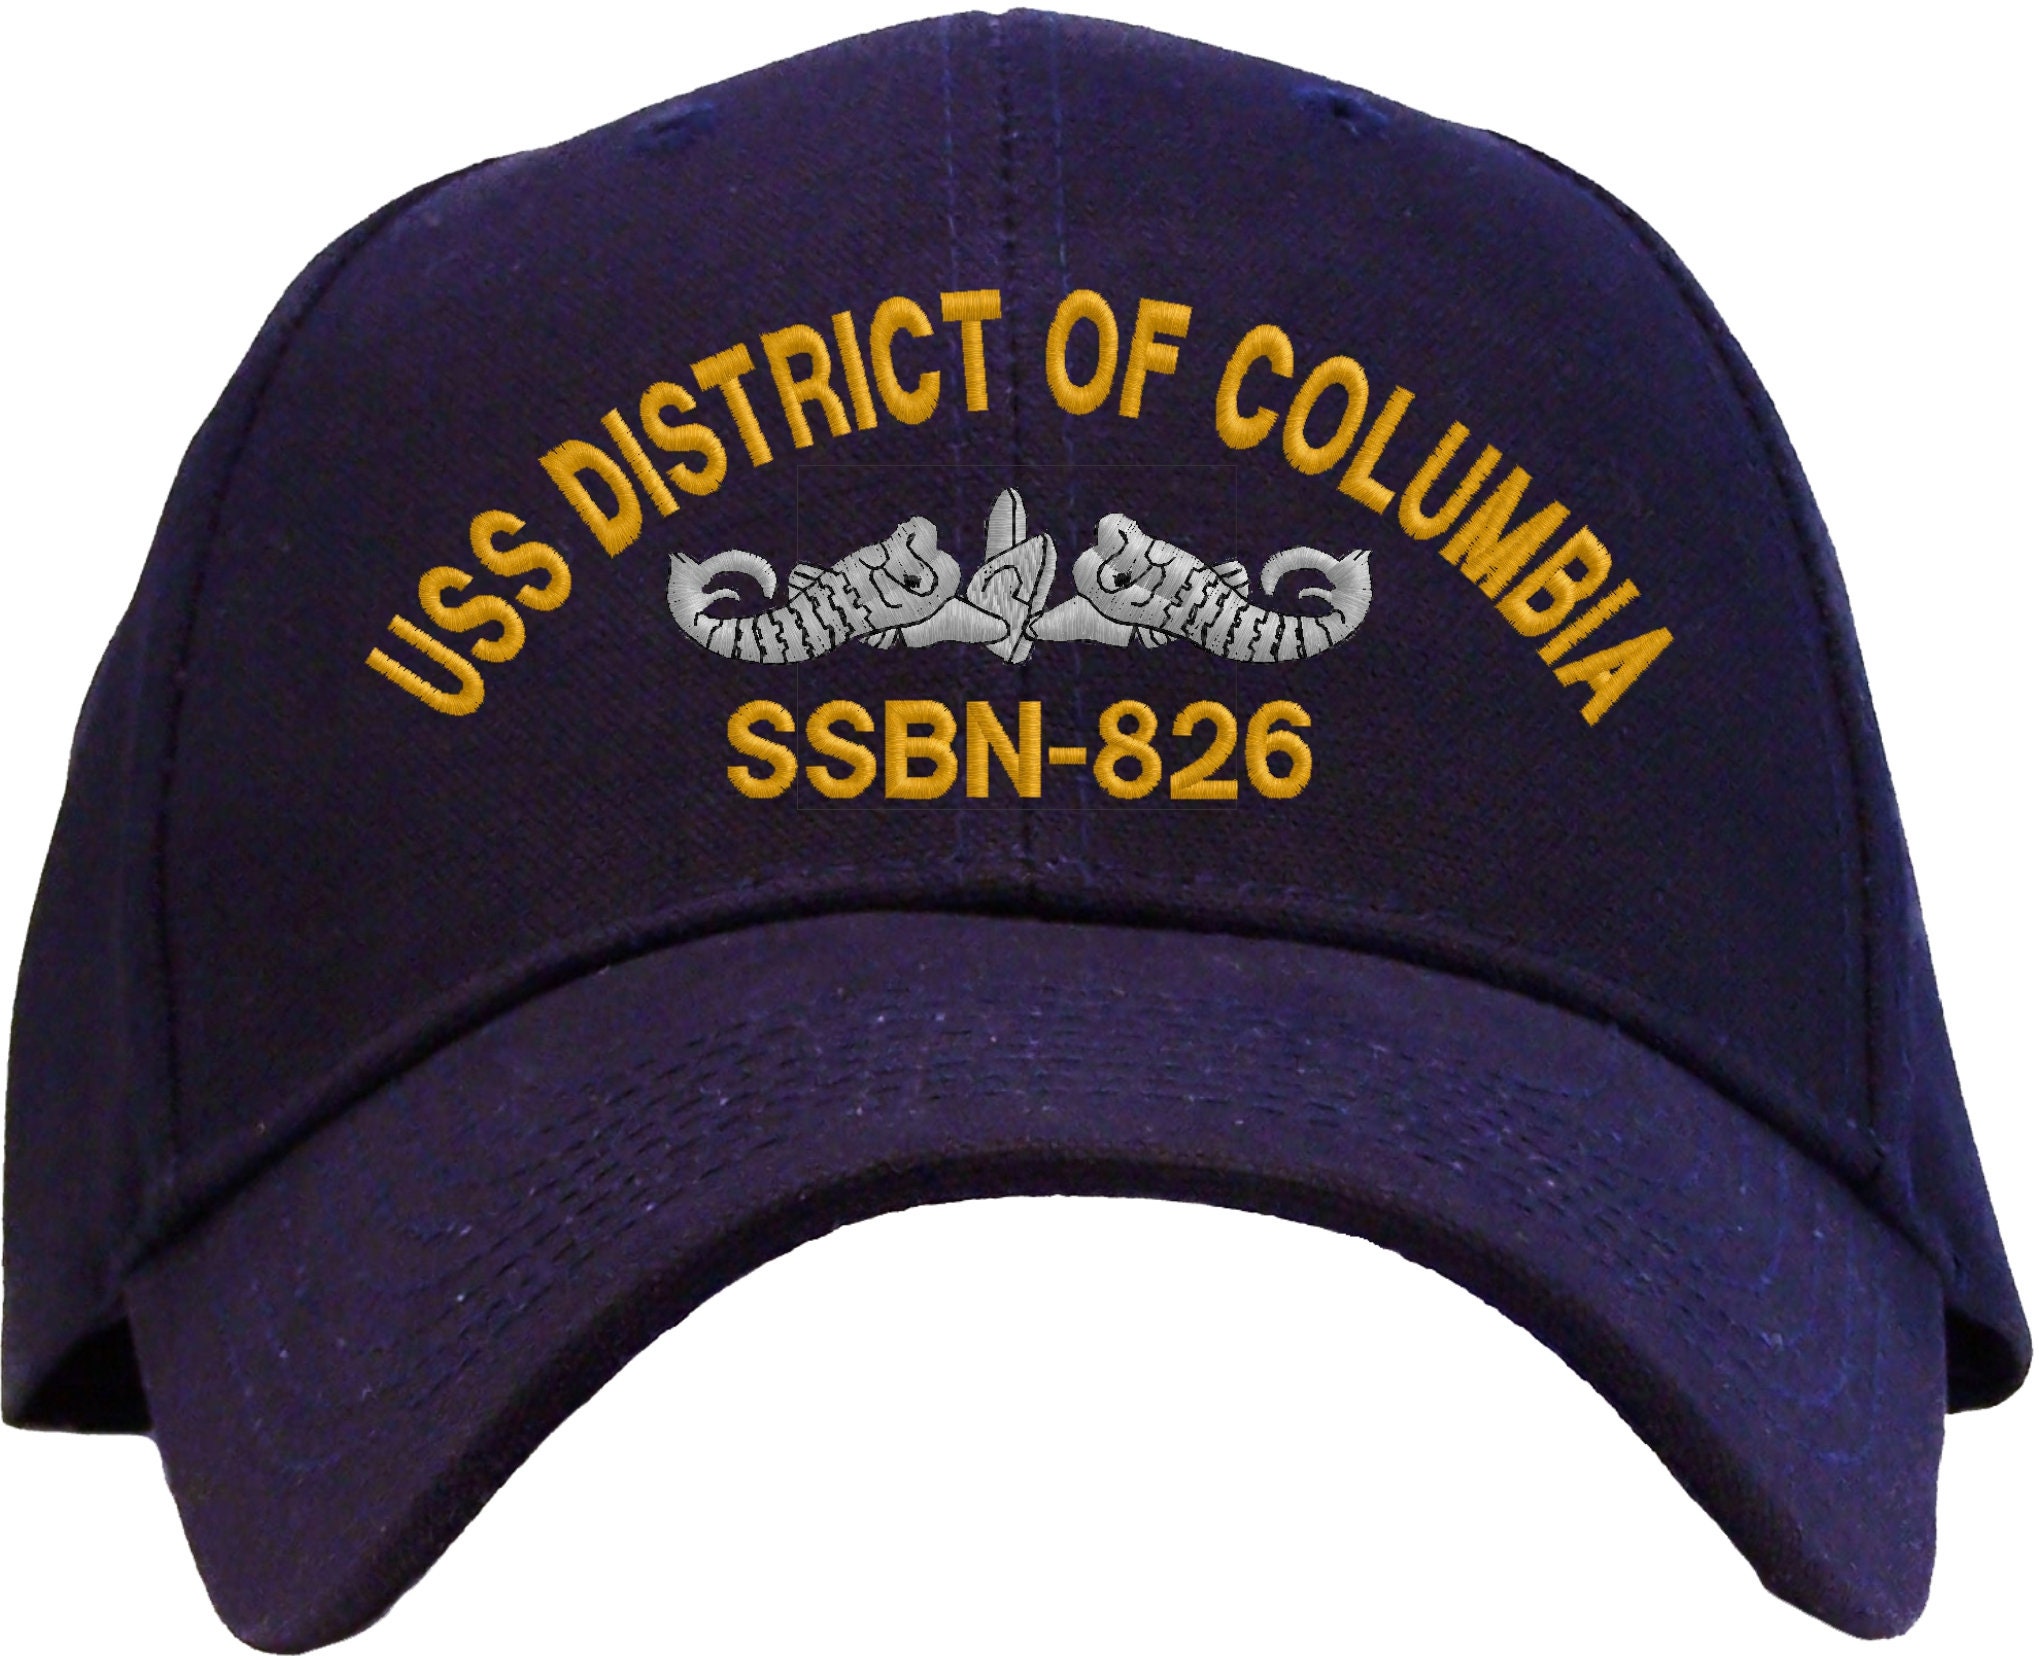 USS District of Columbia SSBN-826 Embroidered Baseball Cap Great